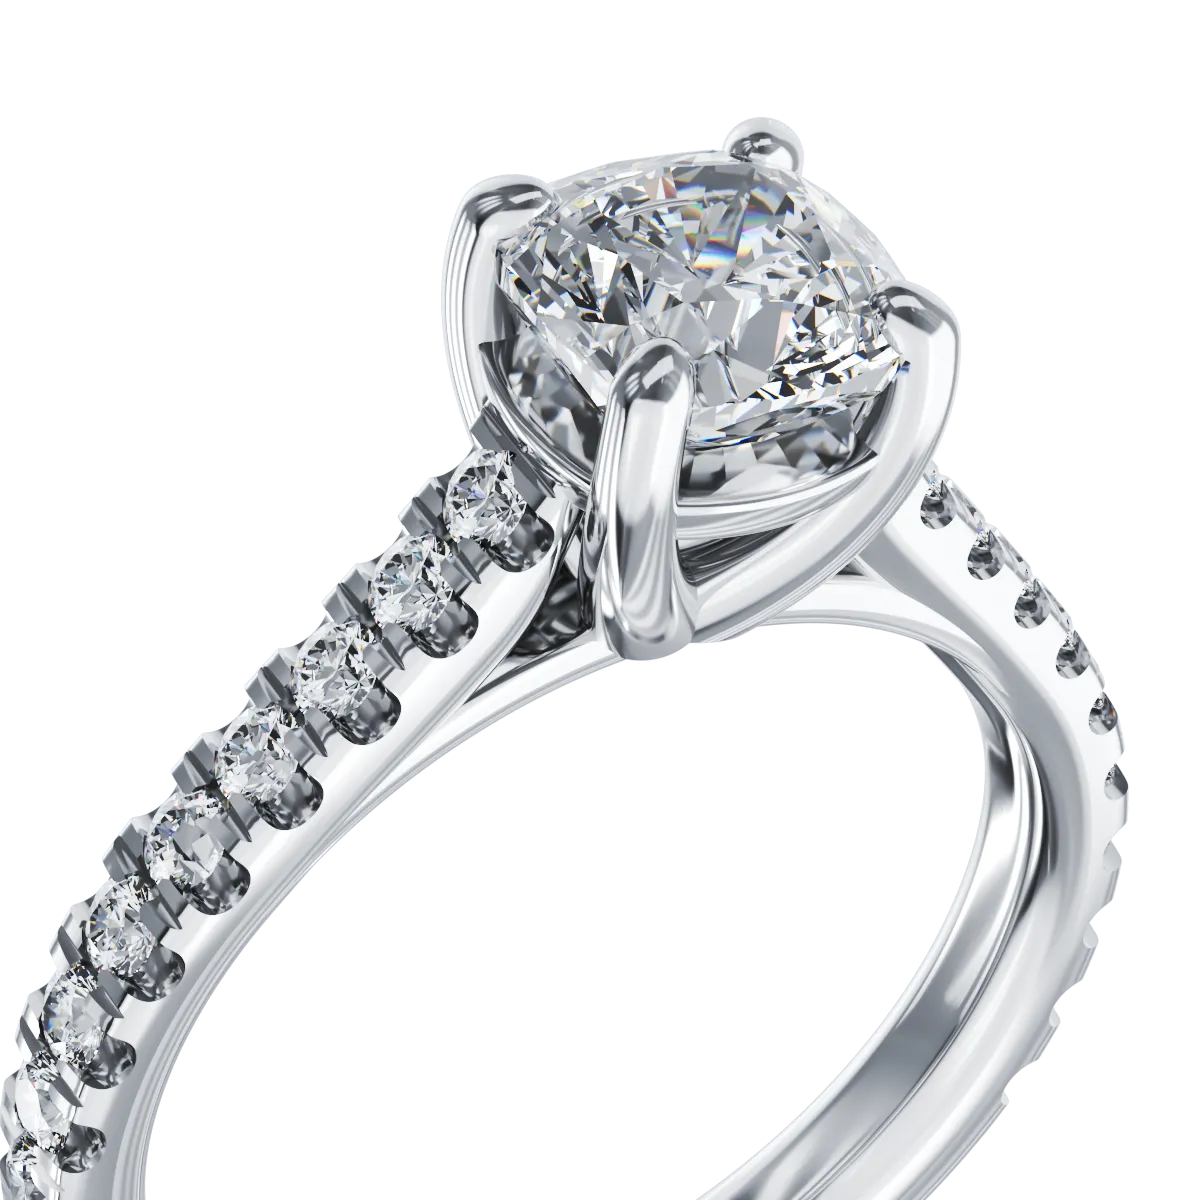 18K white gold engagement ring with 1.2ct diamond and 0.375ct diamonds